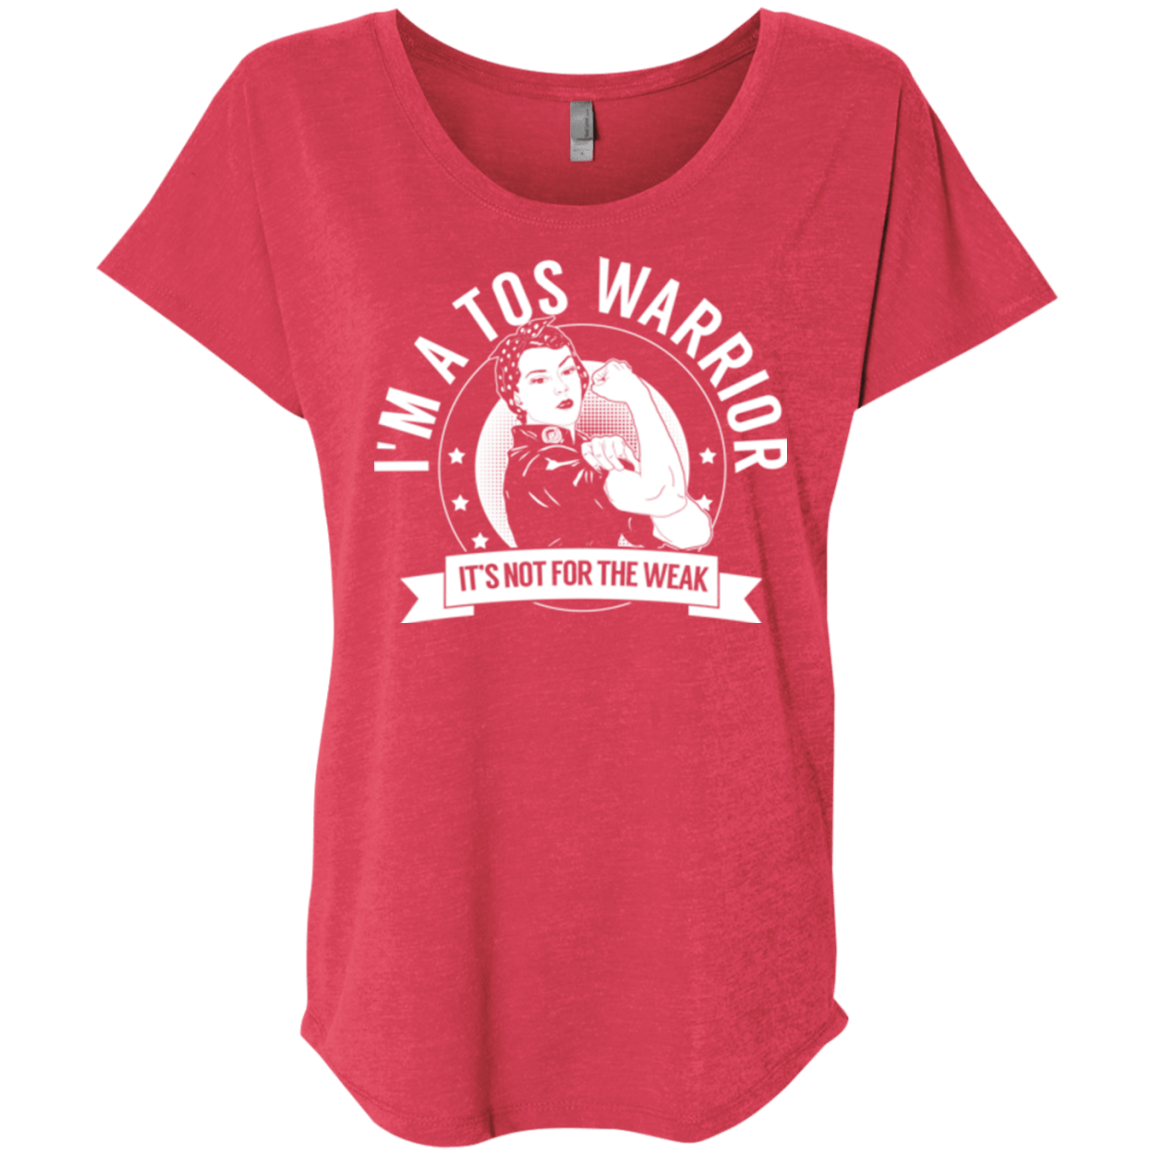 Thoracic Outlet Syndrome - TOS Warrior Not For The Weak Dolman Sleeve - The Unchargeables